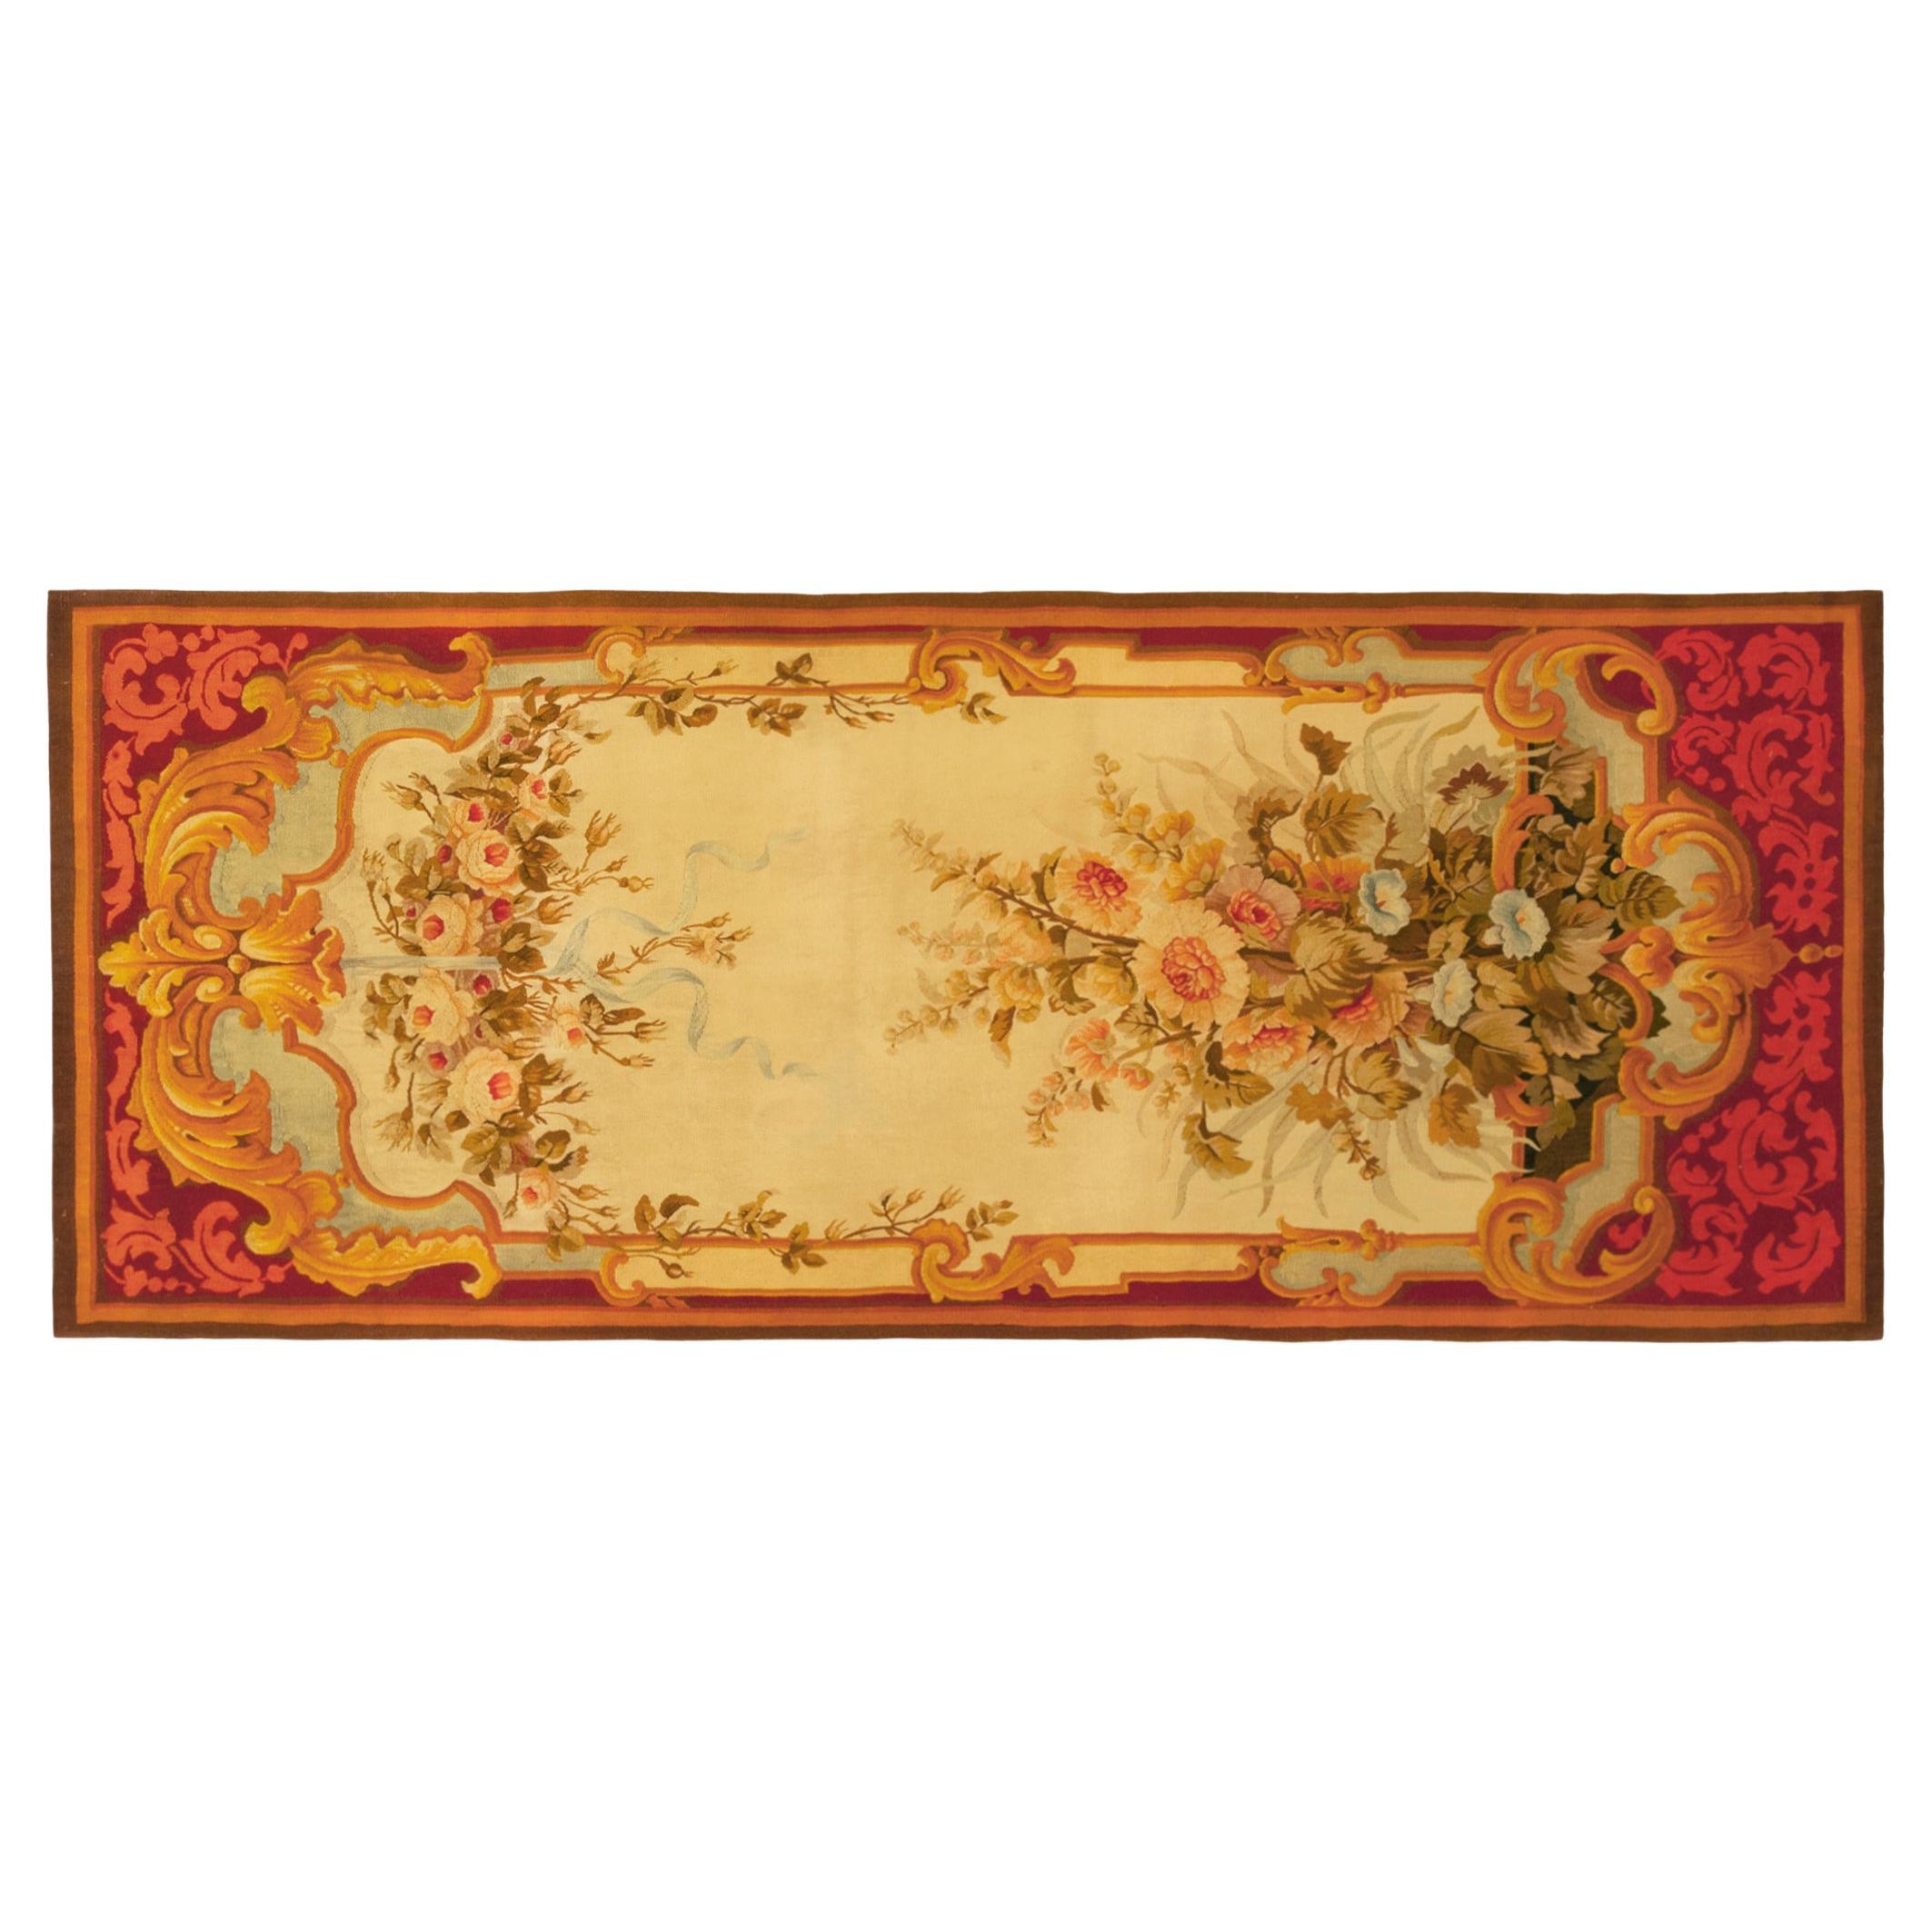 Antique French Aubusson Rug, in Runner size W/ Floral Elements and Directional